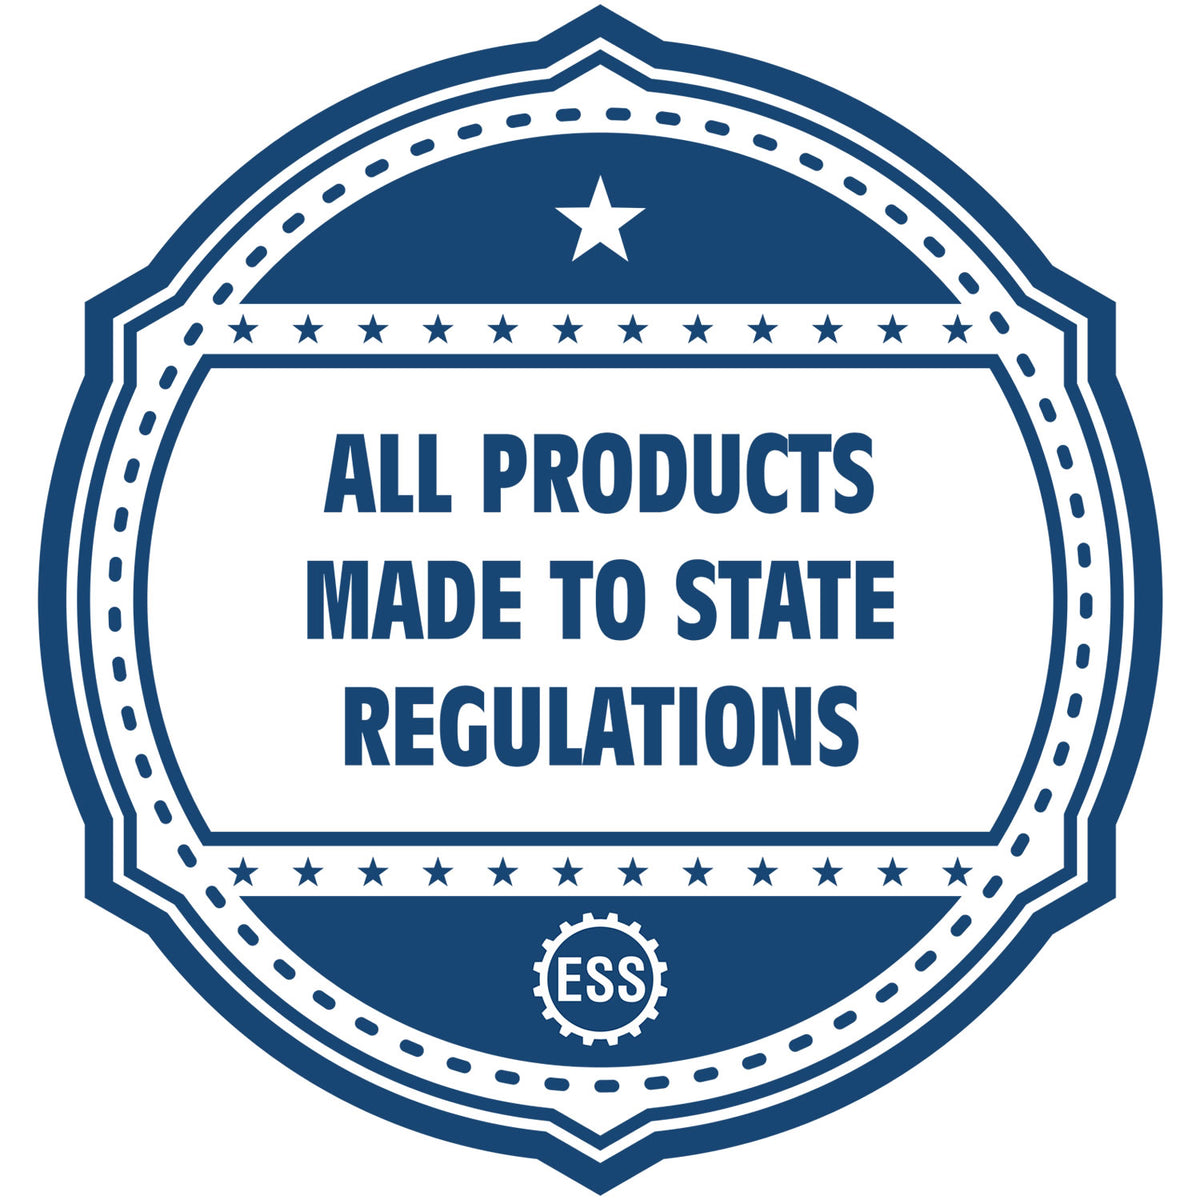 An icon or badge element for the Slim Pre-Inked District of Columbia Professional Engineer Seal Stamp showing that this product is made in compliance with state regulations.